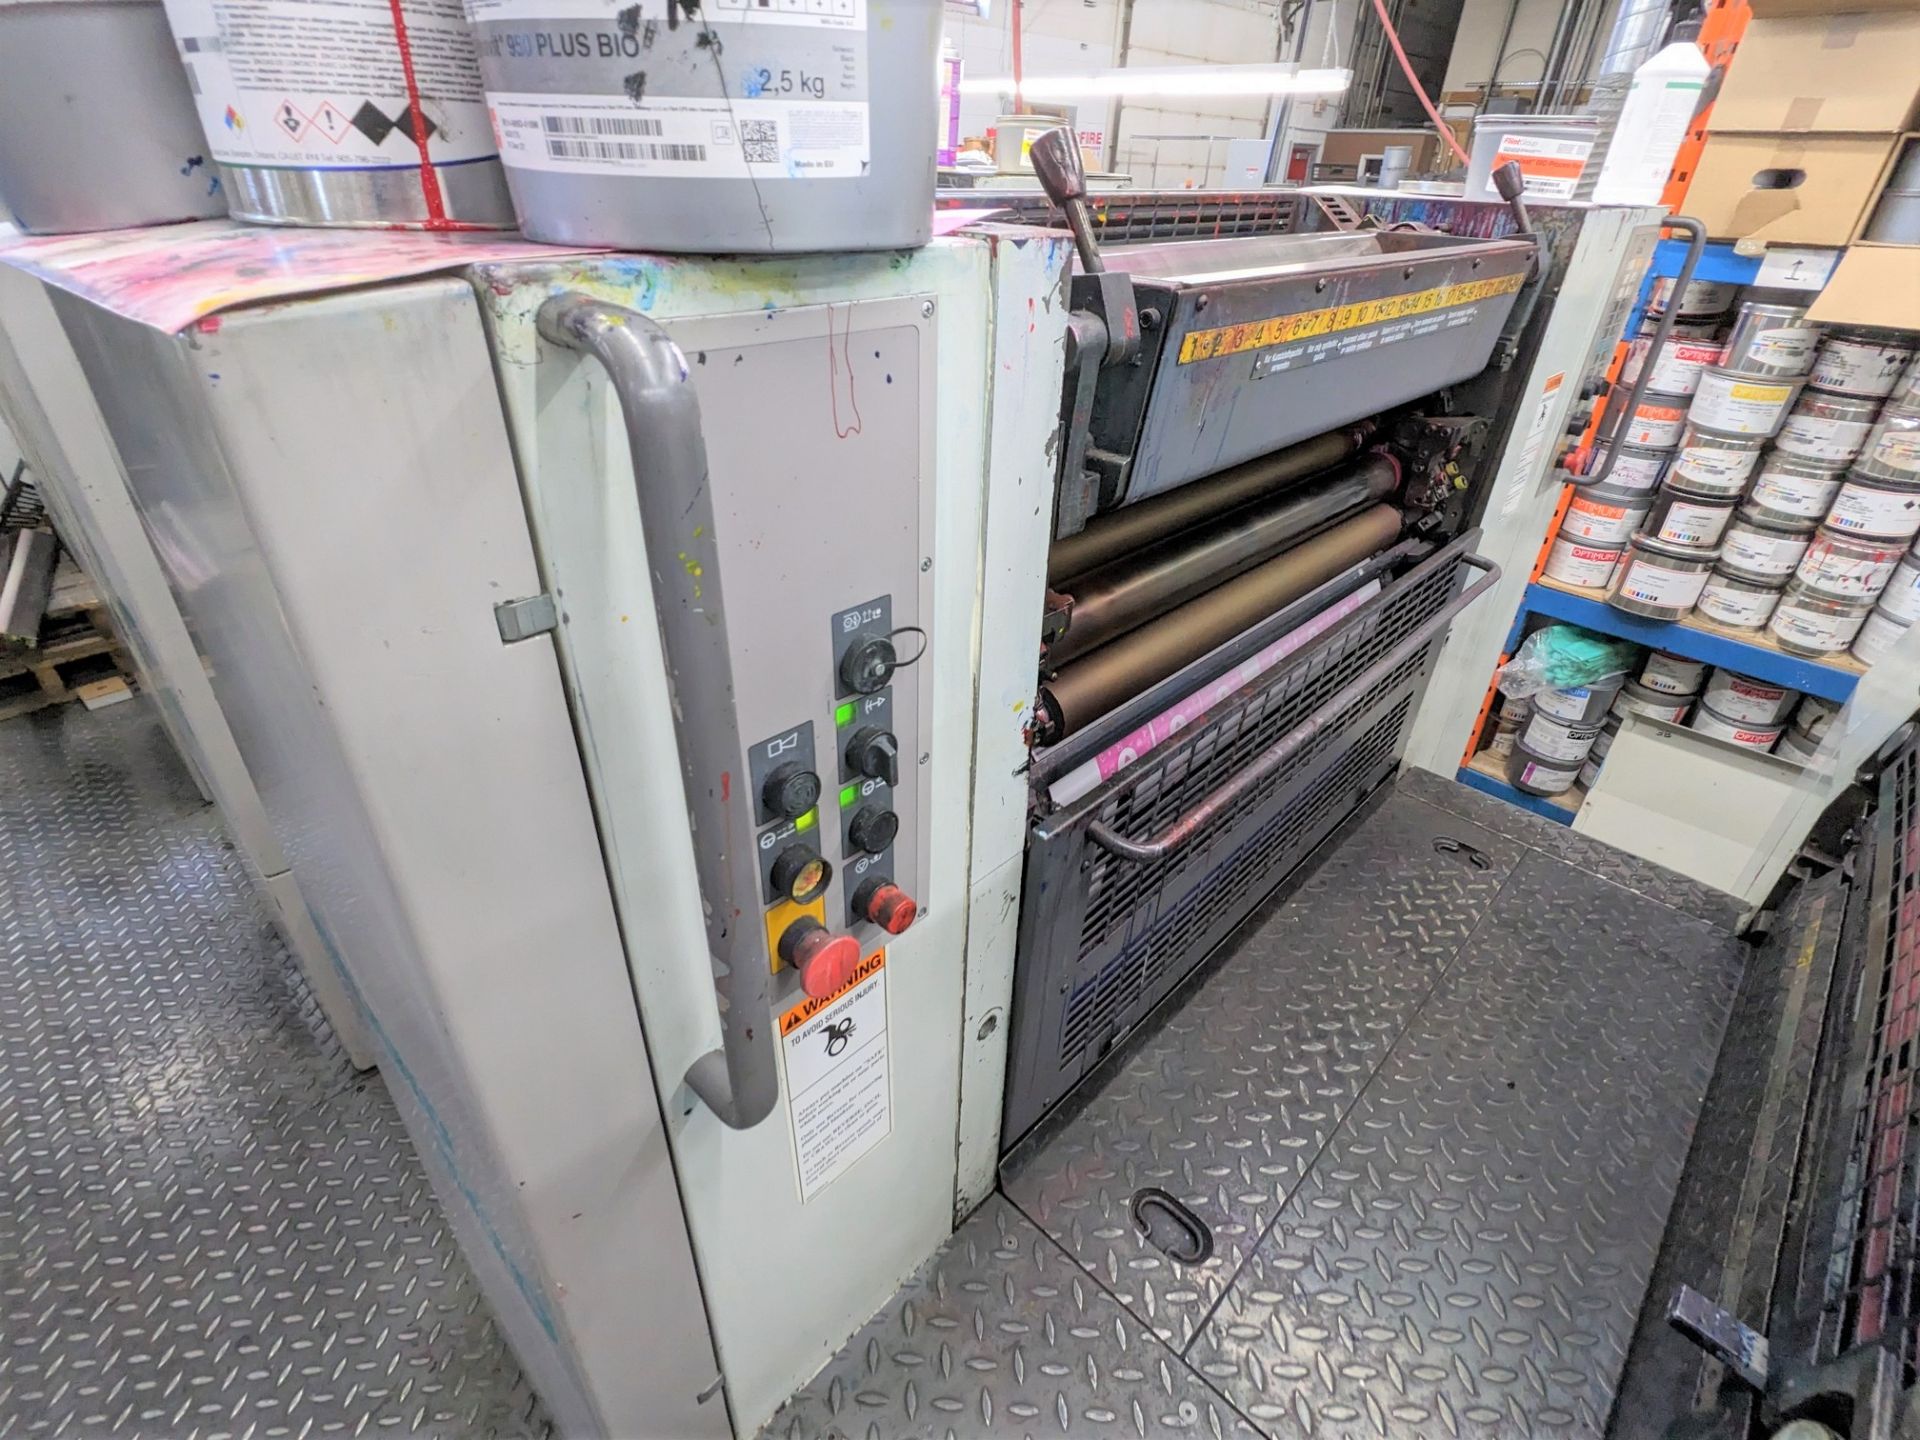 1995 MAN ROLAND 300 6-COLOUR OFFSET PRINTING PRESS, MODEL R306, S/N 25152B, TOTAL SHEET COUNT - Image 16 of 53